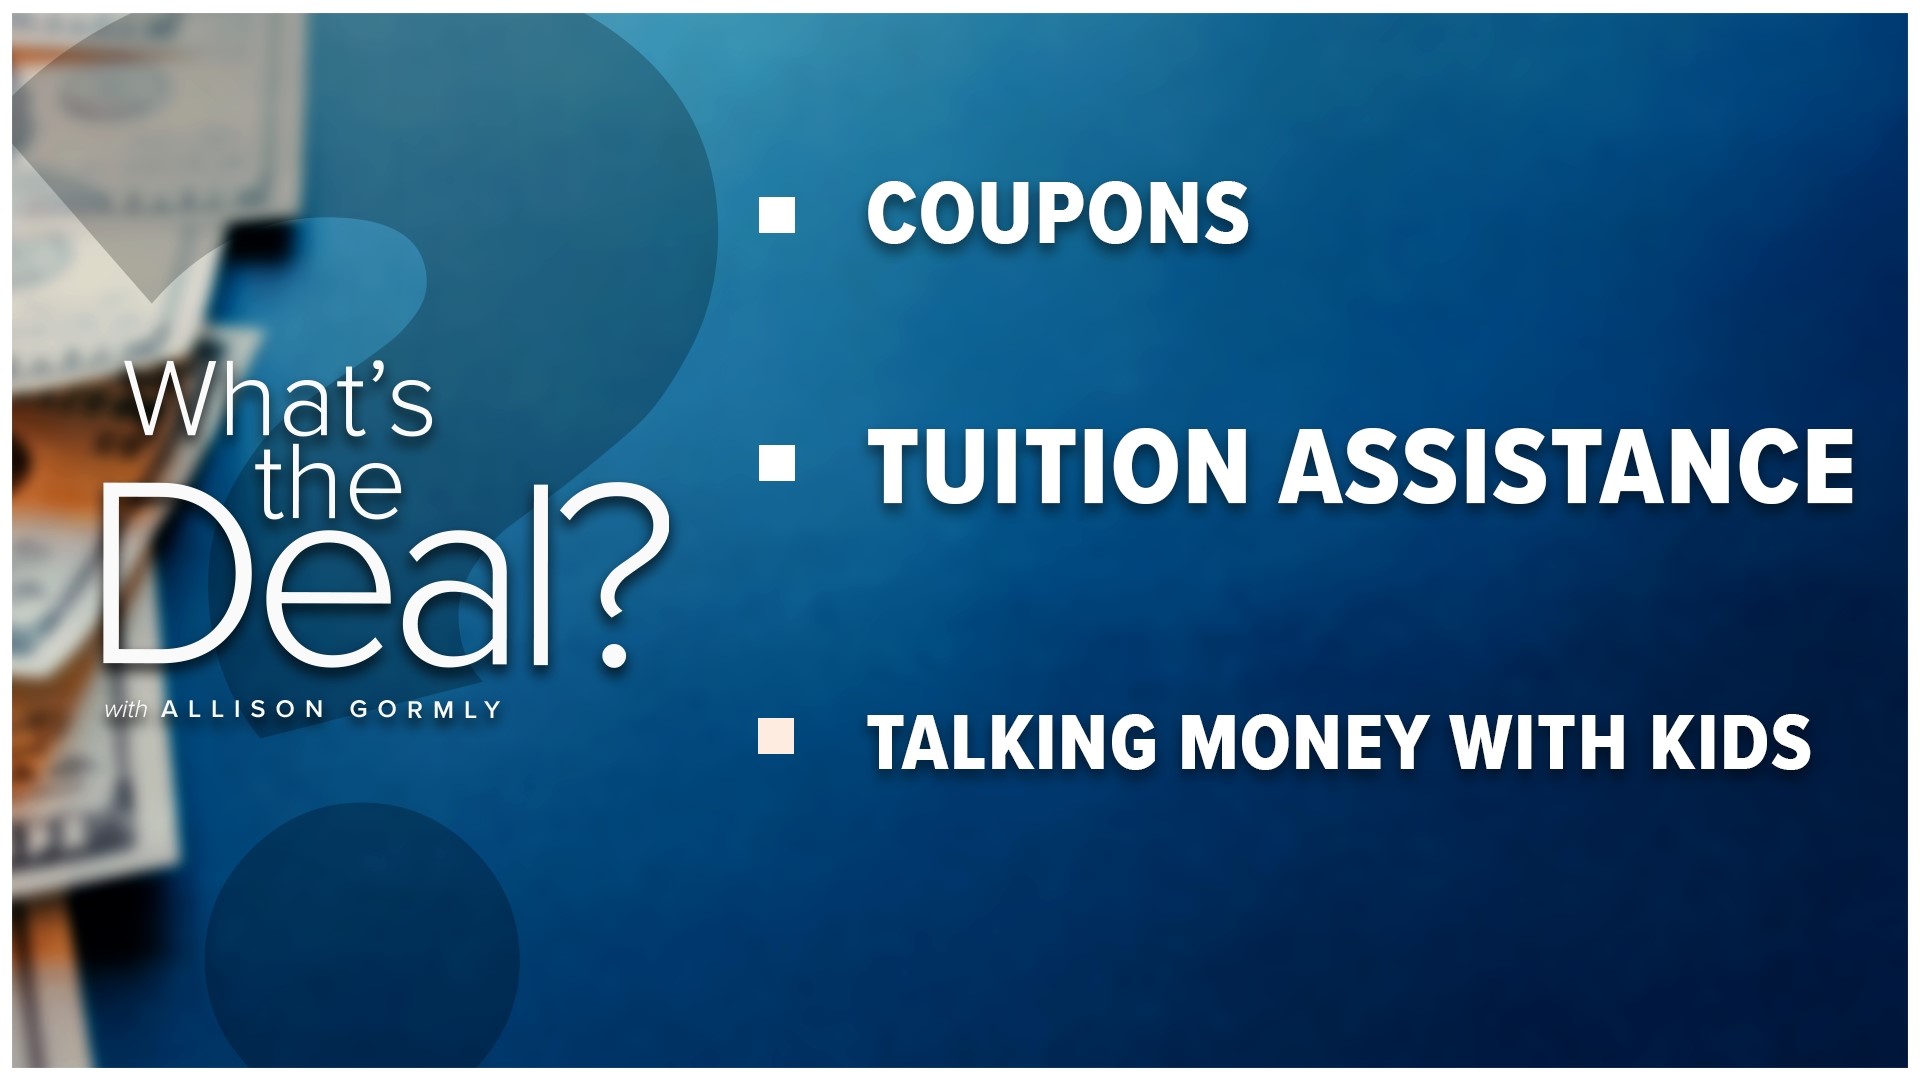 Explaining what you need to know when it comes to saving money with coupons, tuition assistance at schools and when to start talking to your kids about money.